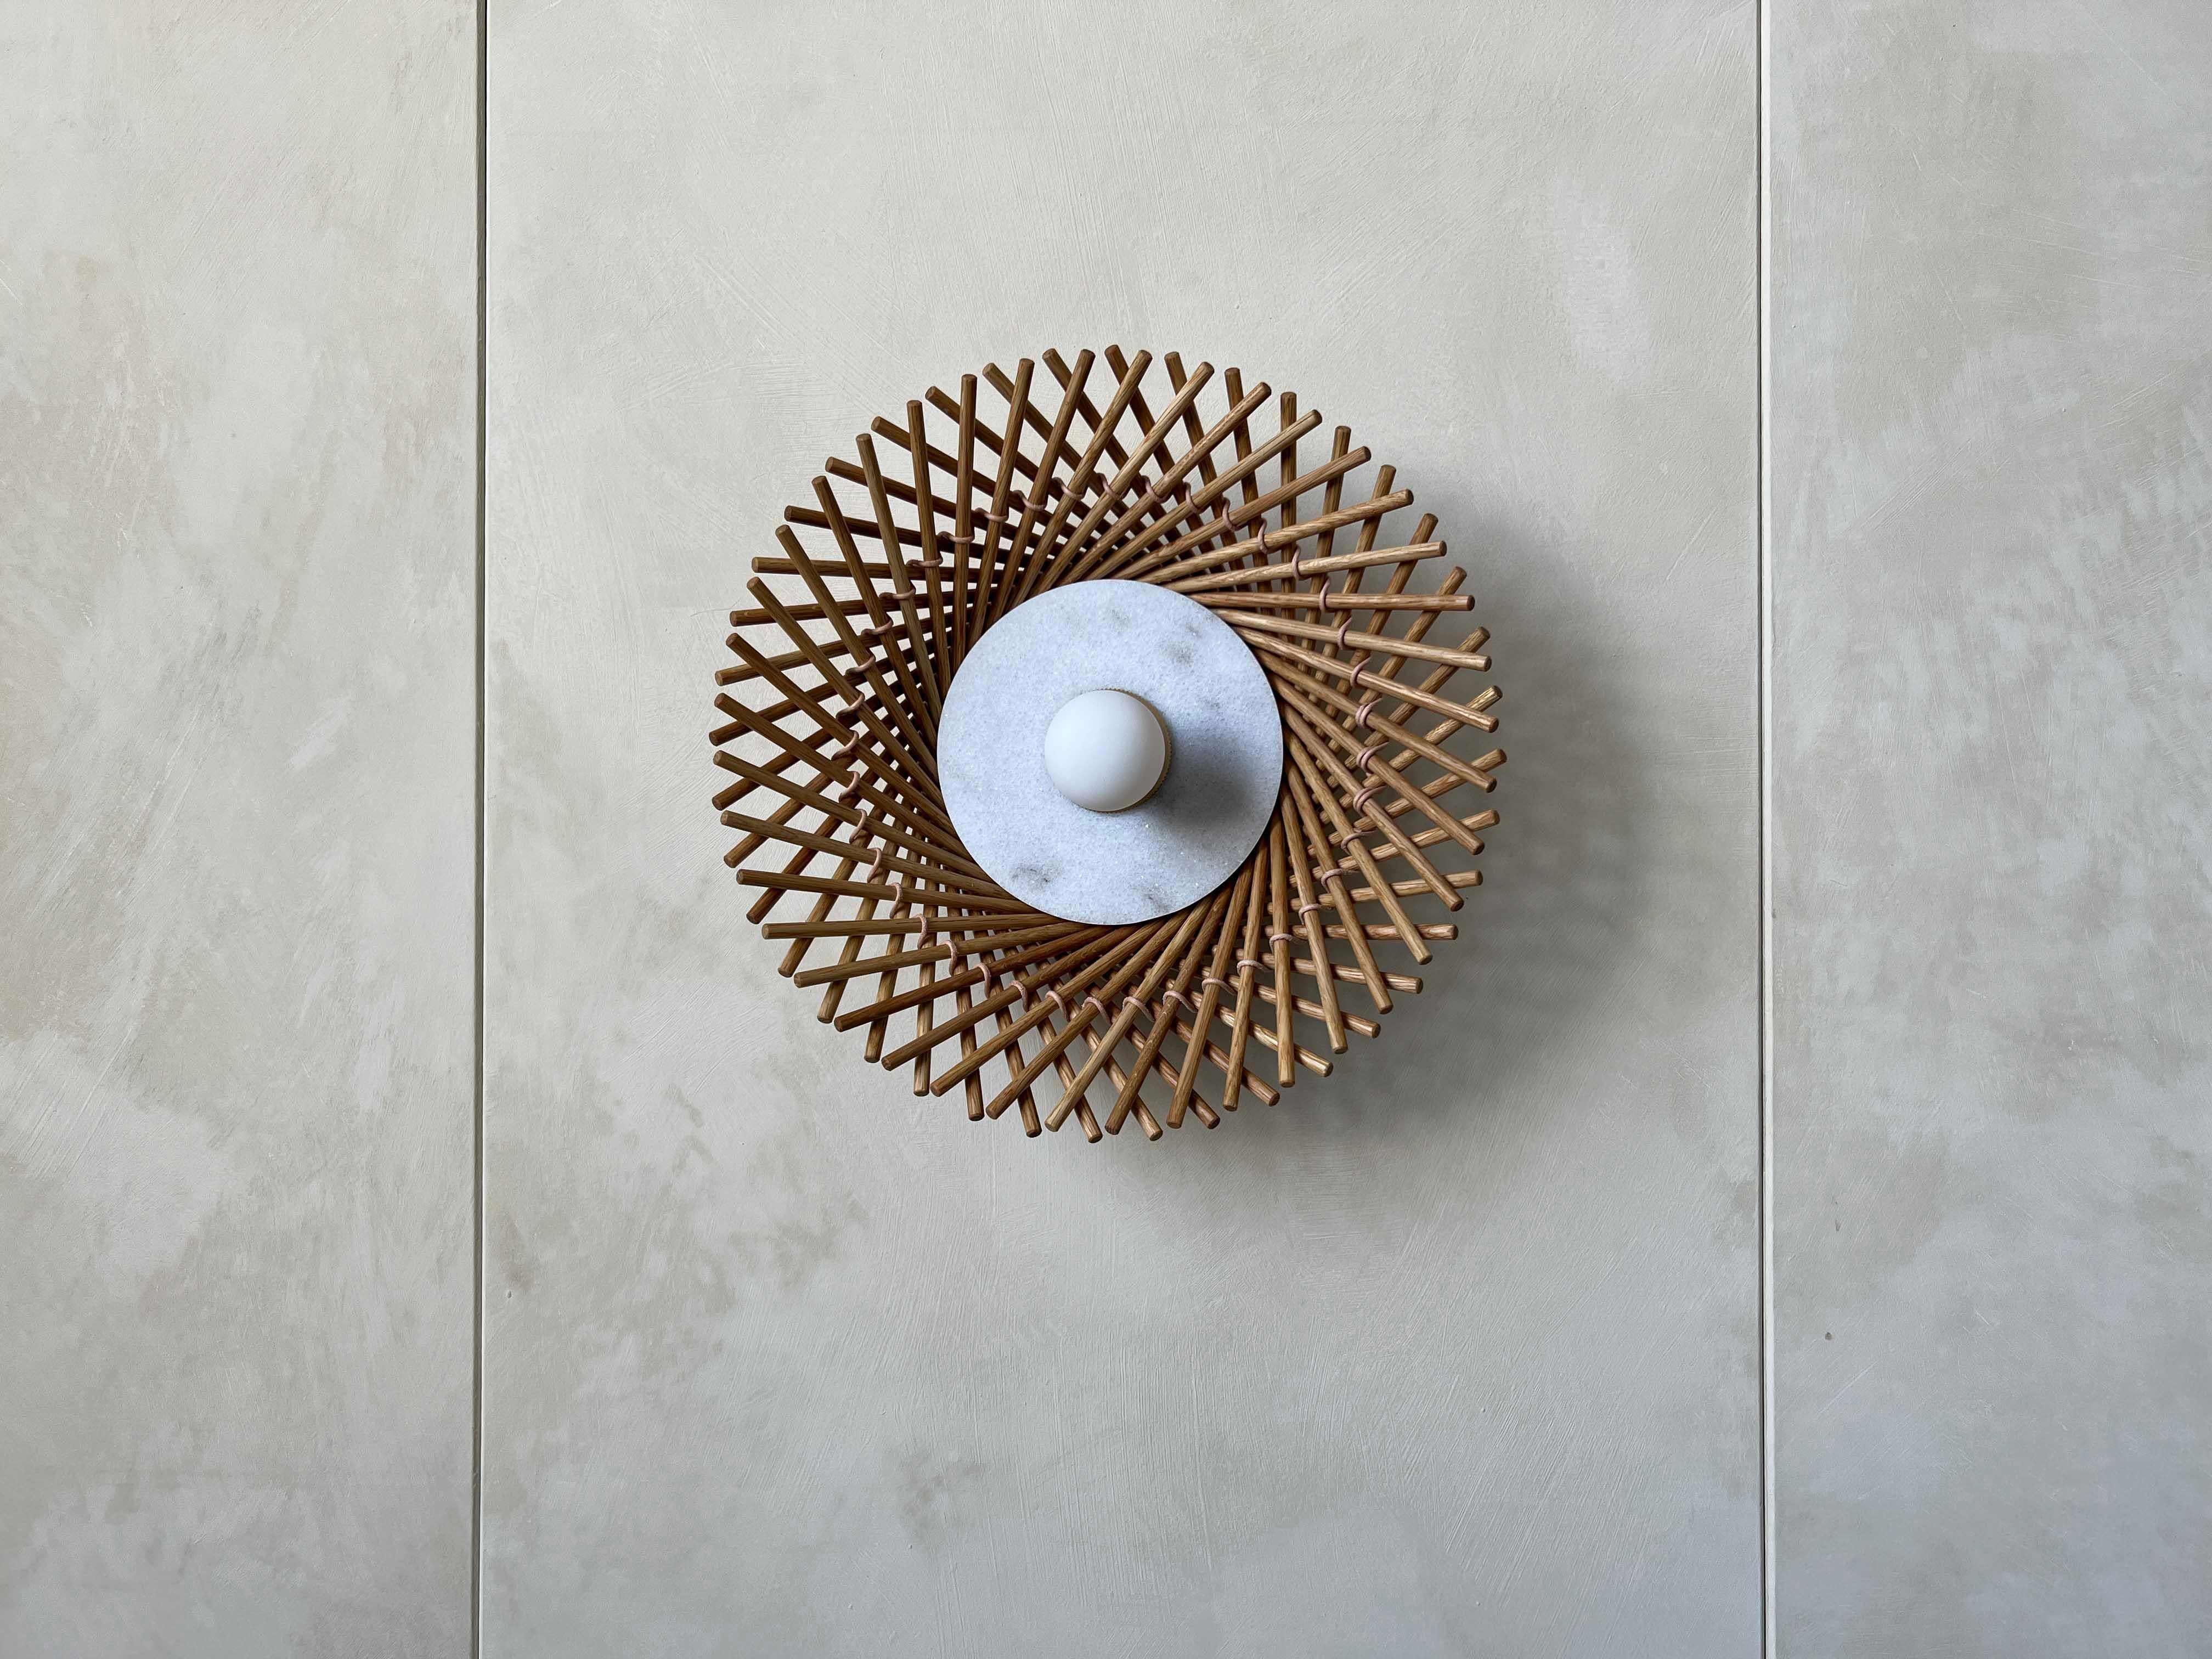 Playing with the interaction of light and geometry, the Mooda Sconces offer a contemporary lighting solution without being disconnected from its surroundings. When illuminated, the sconce throws a dramatic yet gentle shadow onto the wall, filling